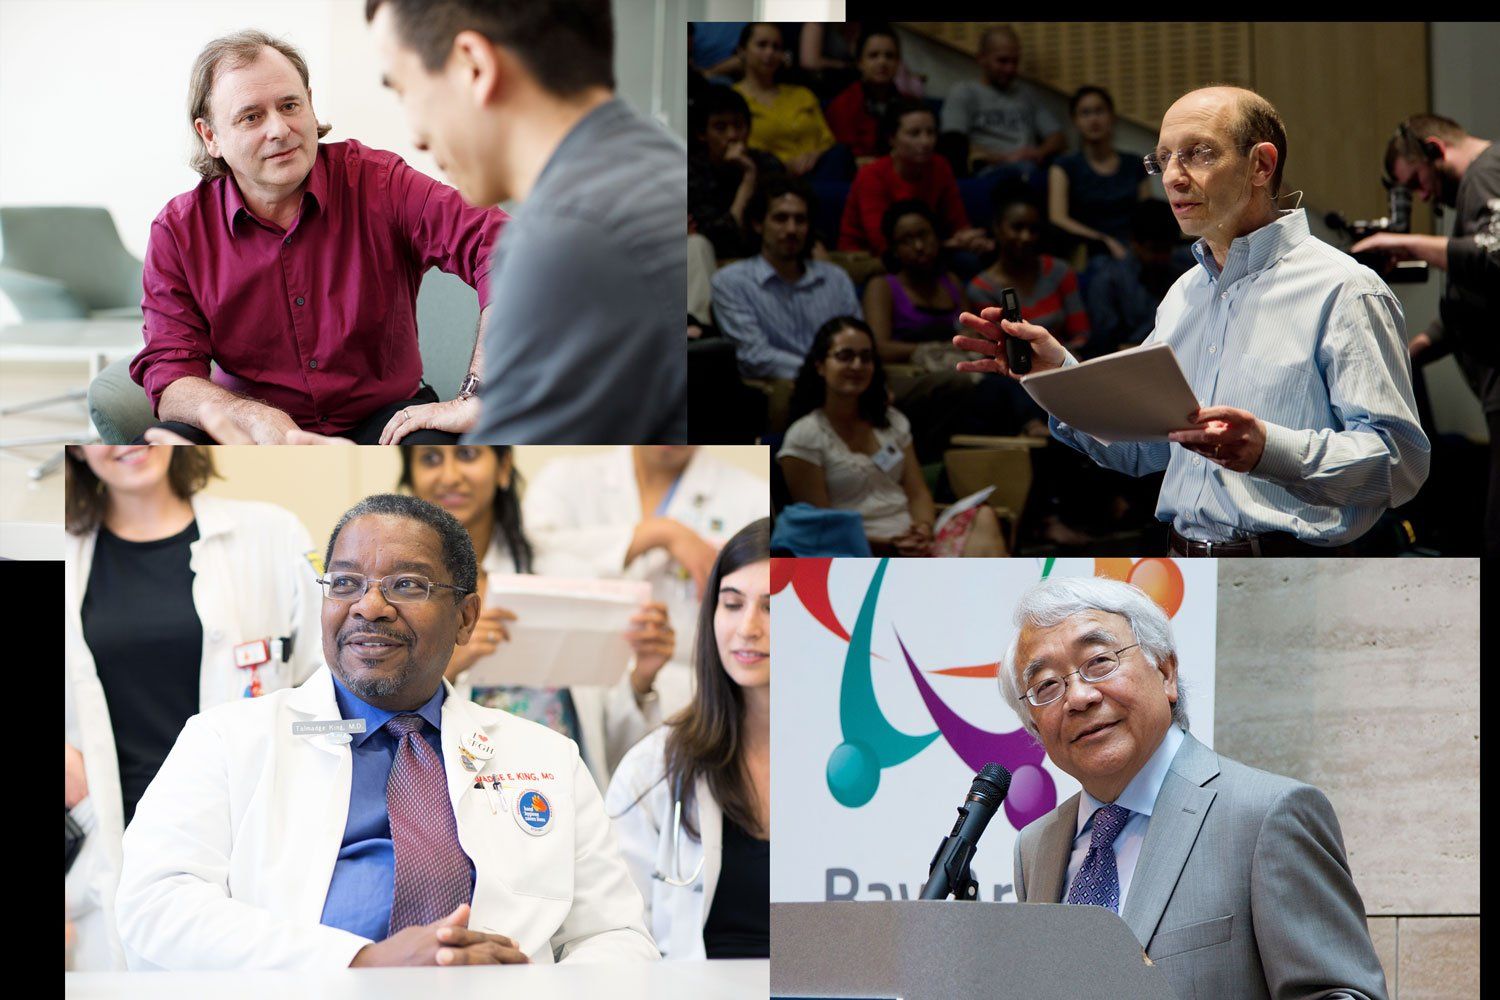 Collage of four images. Alan Ashworth, PhD, FRS. Dan Lowenstein, MD. Talmadge King Jr., MD and Keith Yamamoto, PhD